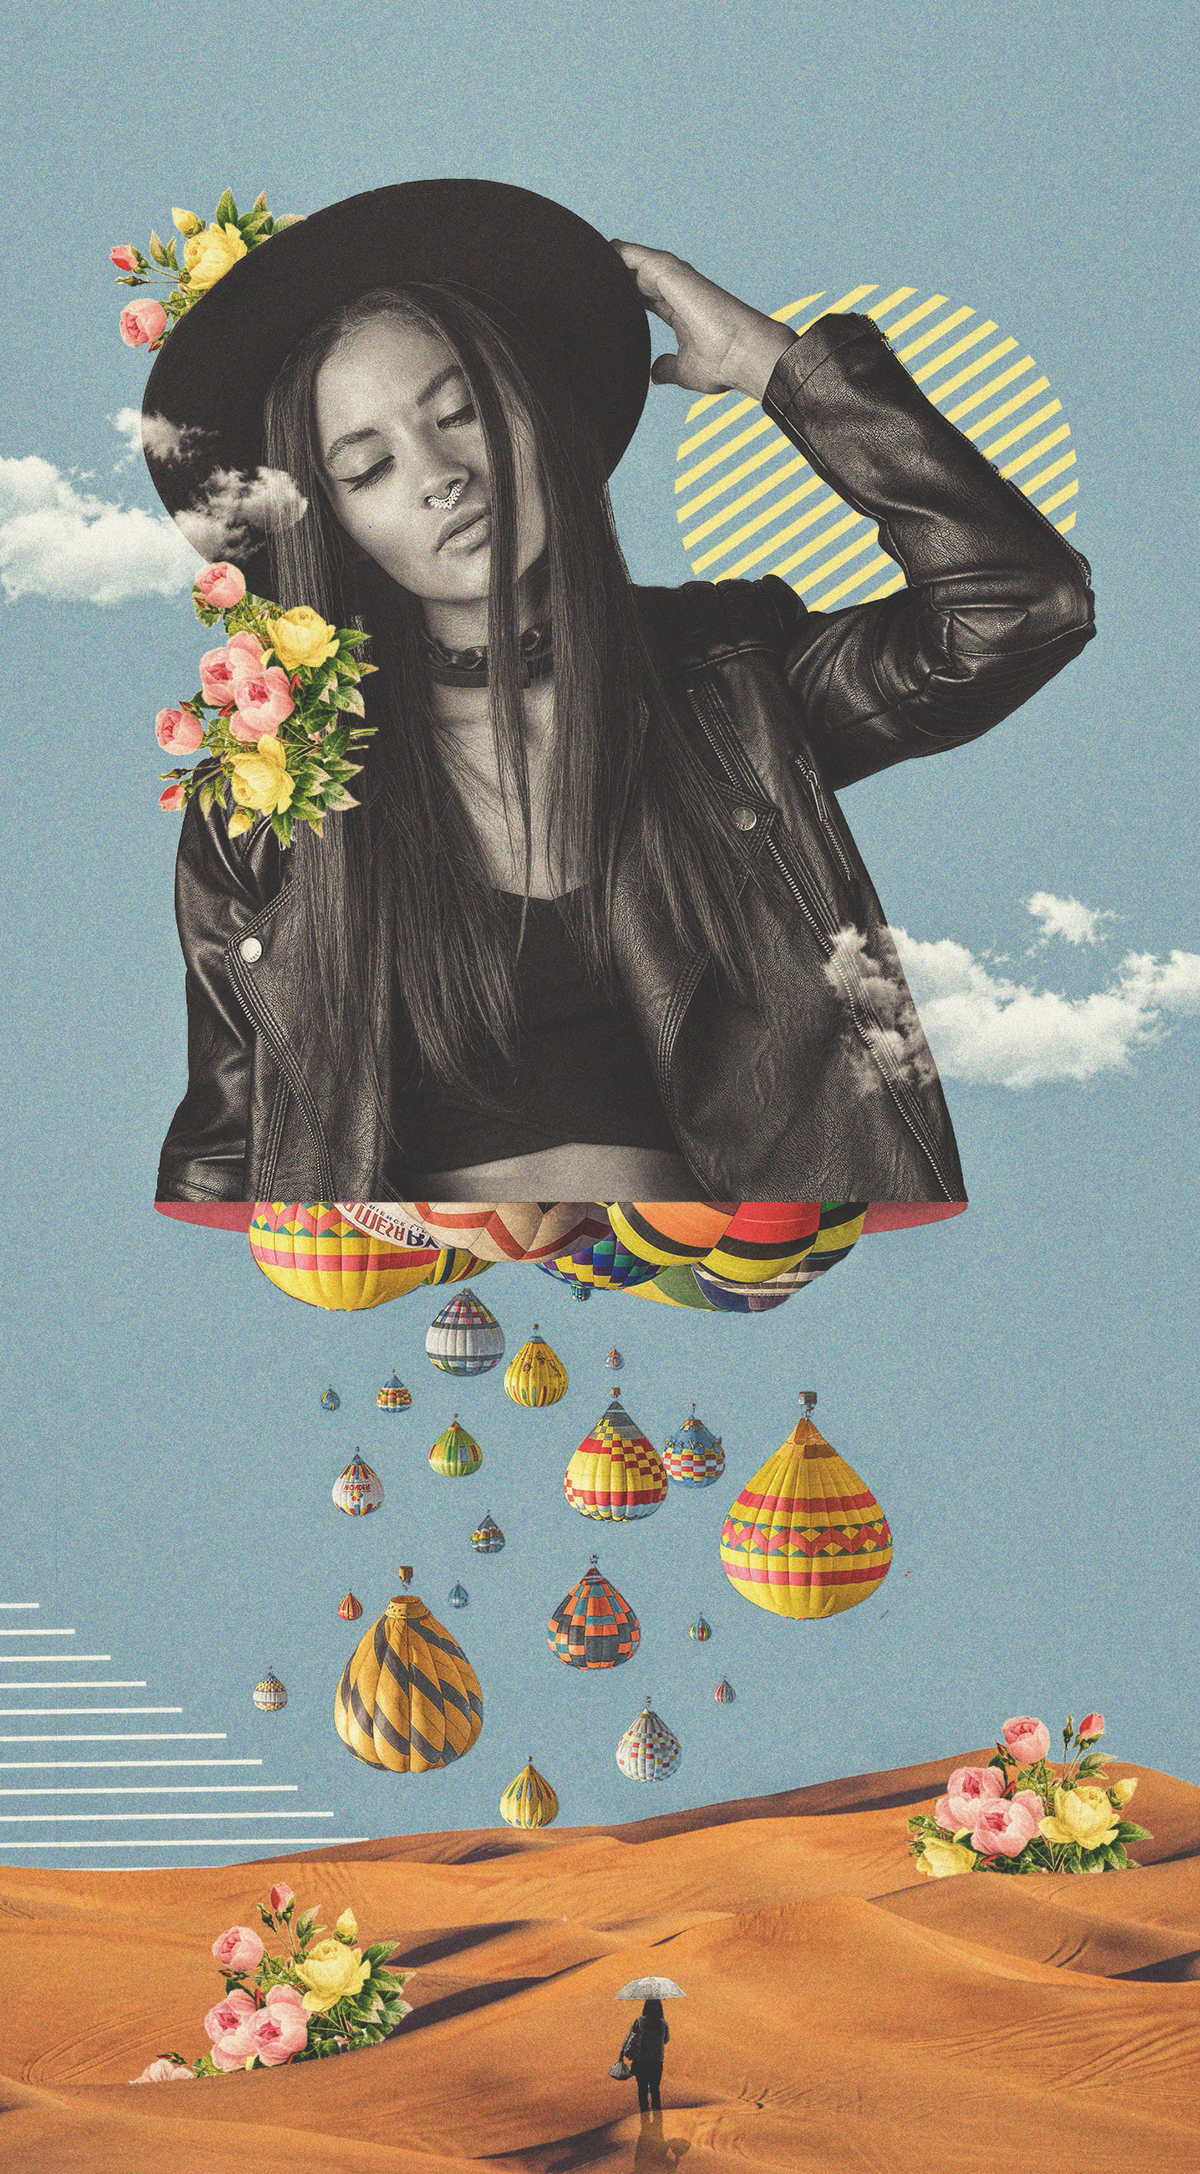 Collage Art by Abdo Hassan #artpeople